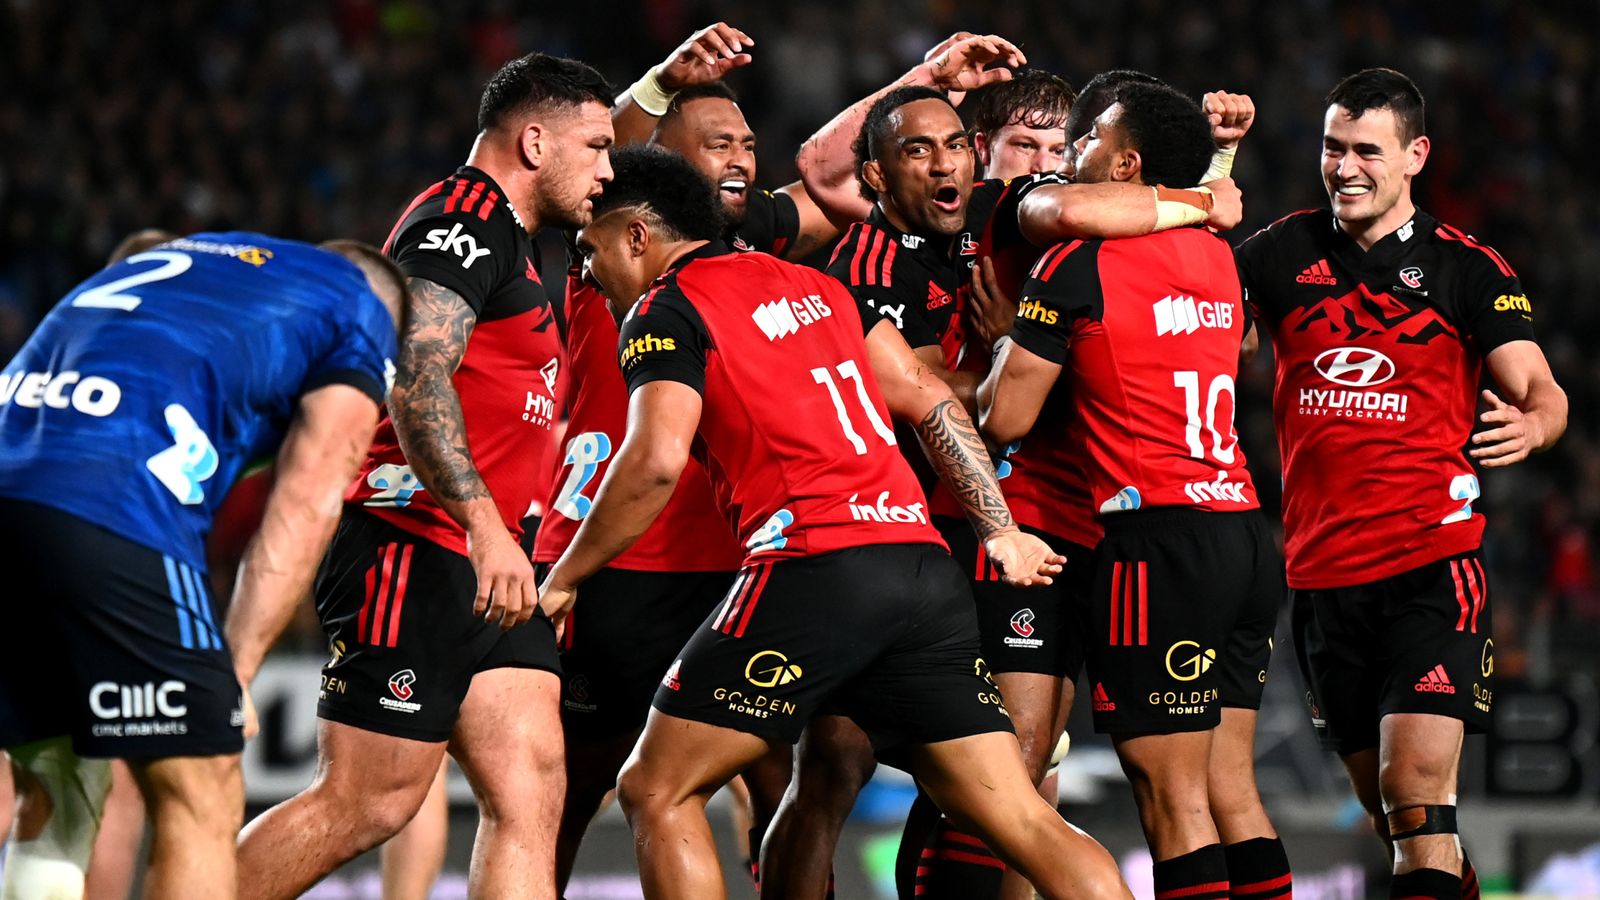 Super Rugby Pacific Final: Crusaders dominate Blues during 21-7 victory in Auckland to claim 11th title